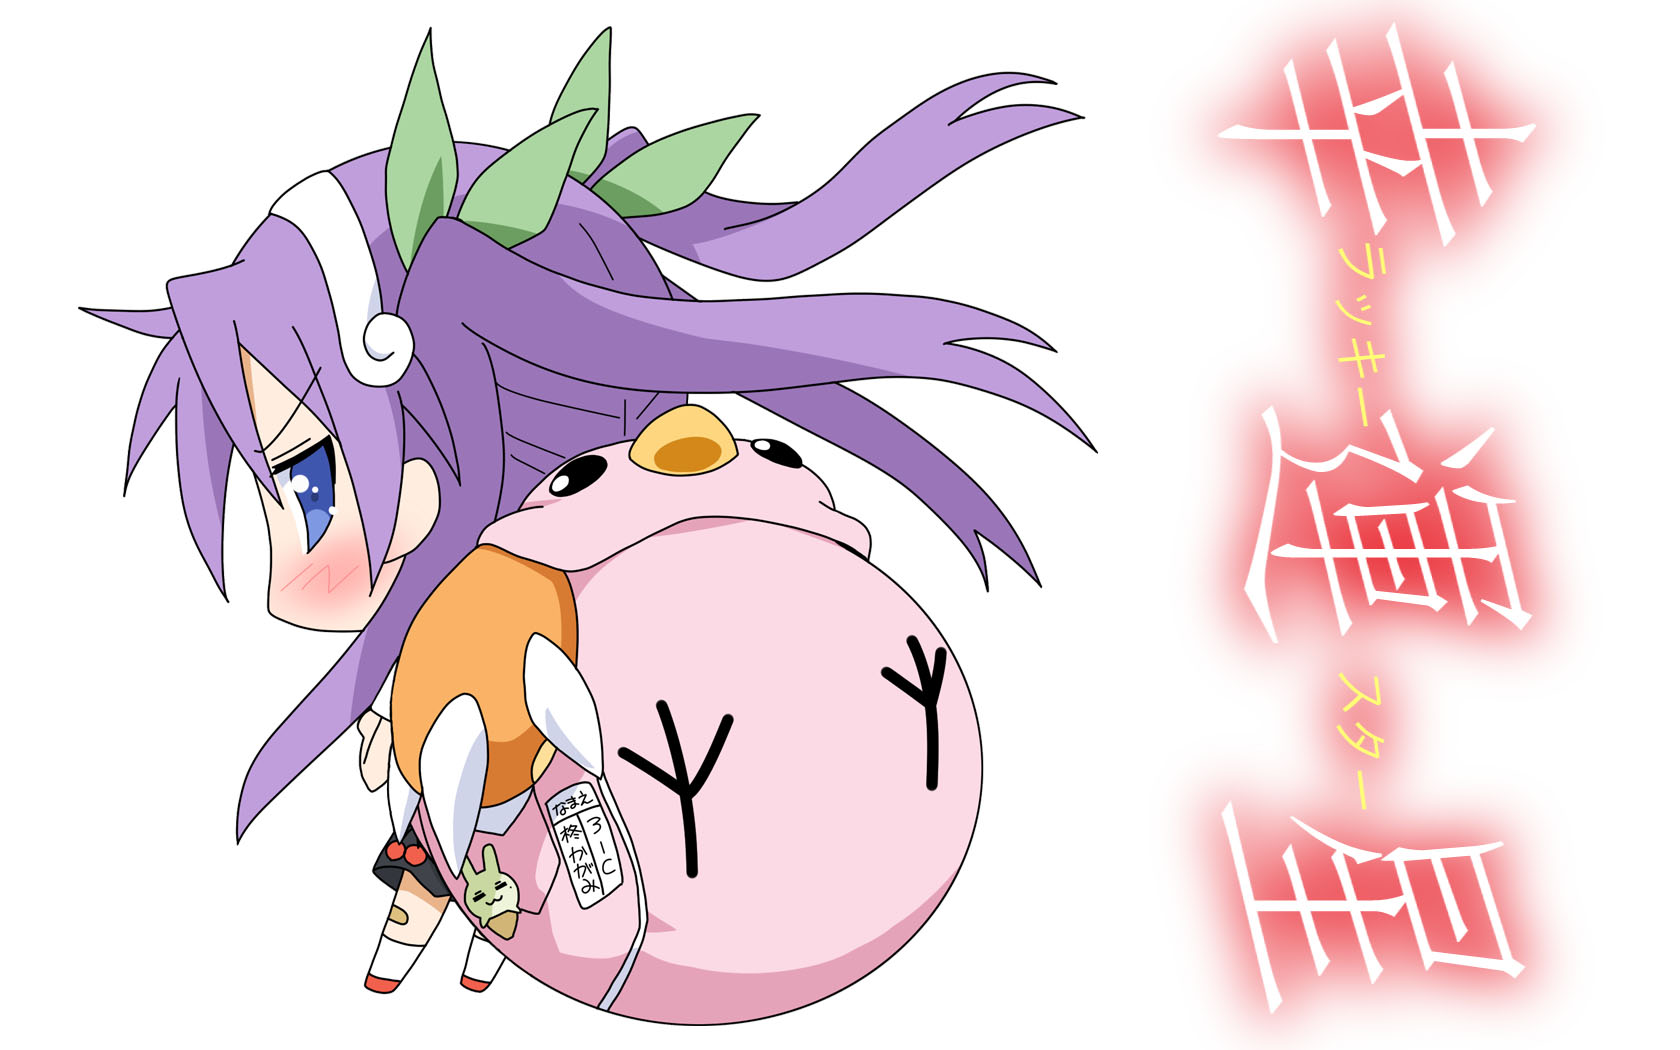 Anime characters Mayoi Hachikuji and Kagami Hiiragi from Lucky Star.